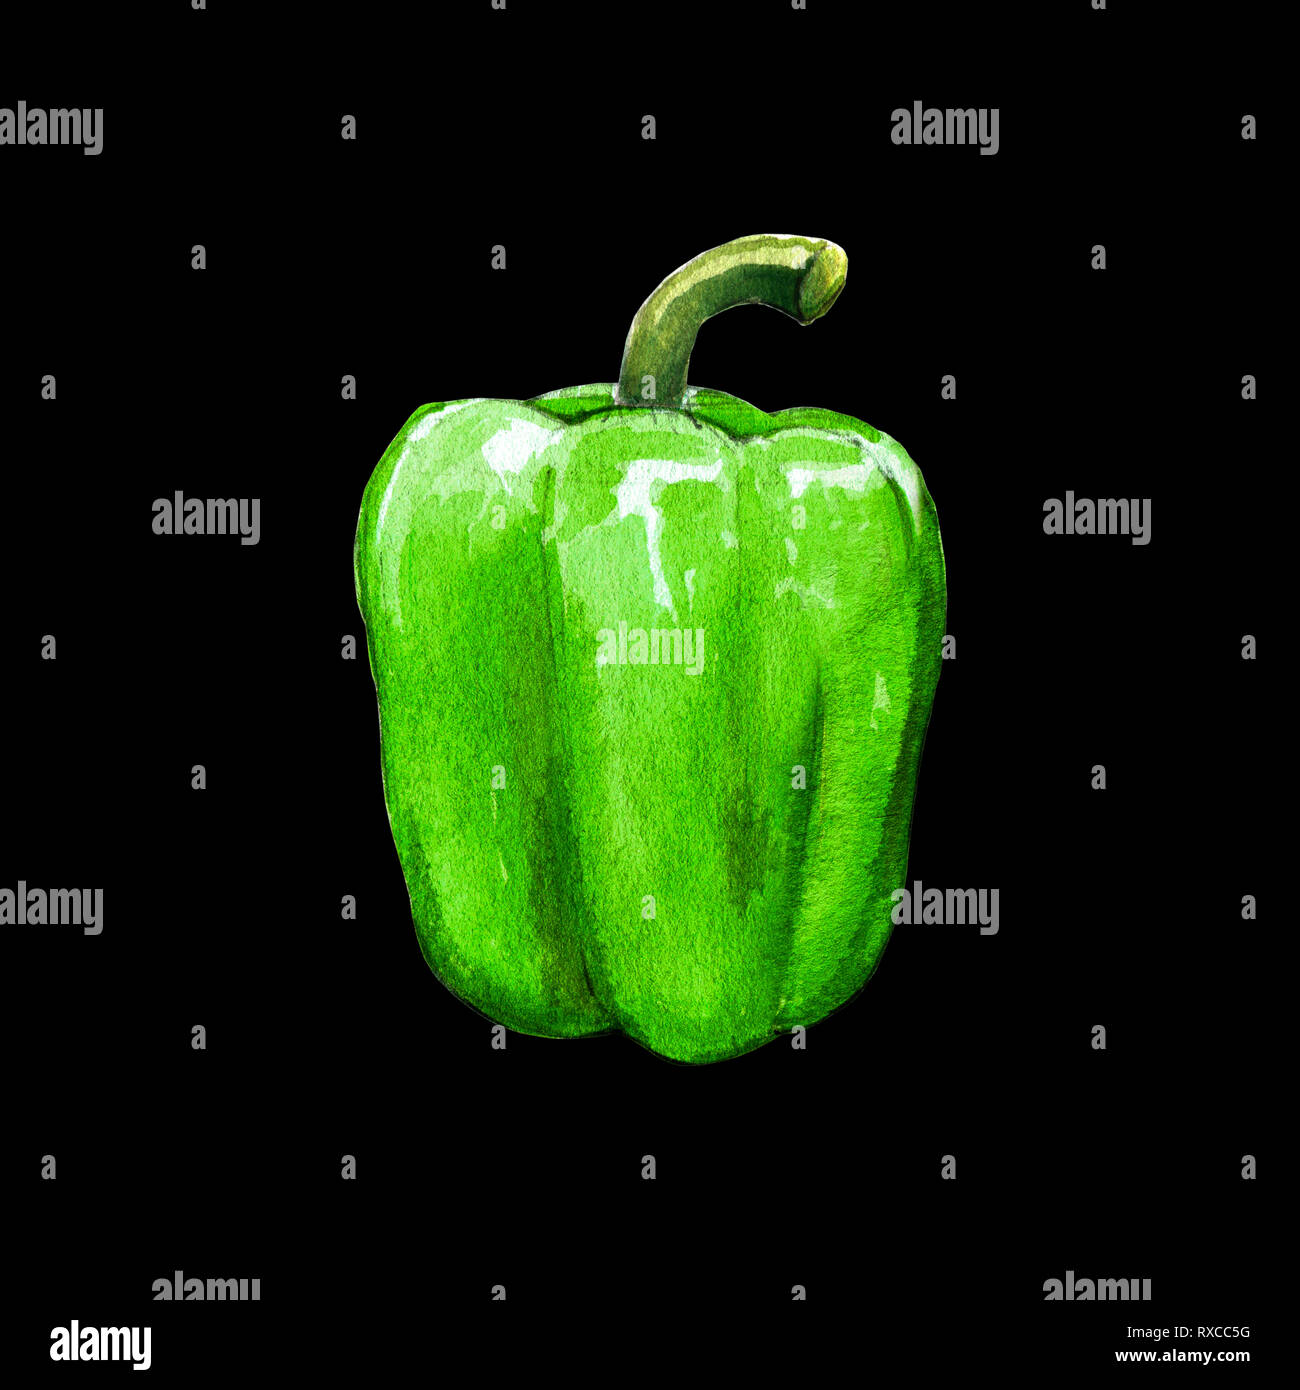 green bell pepper watercolor illustration on black background Stock Photo